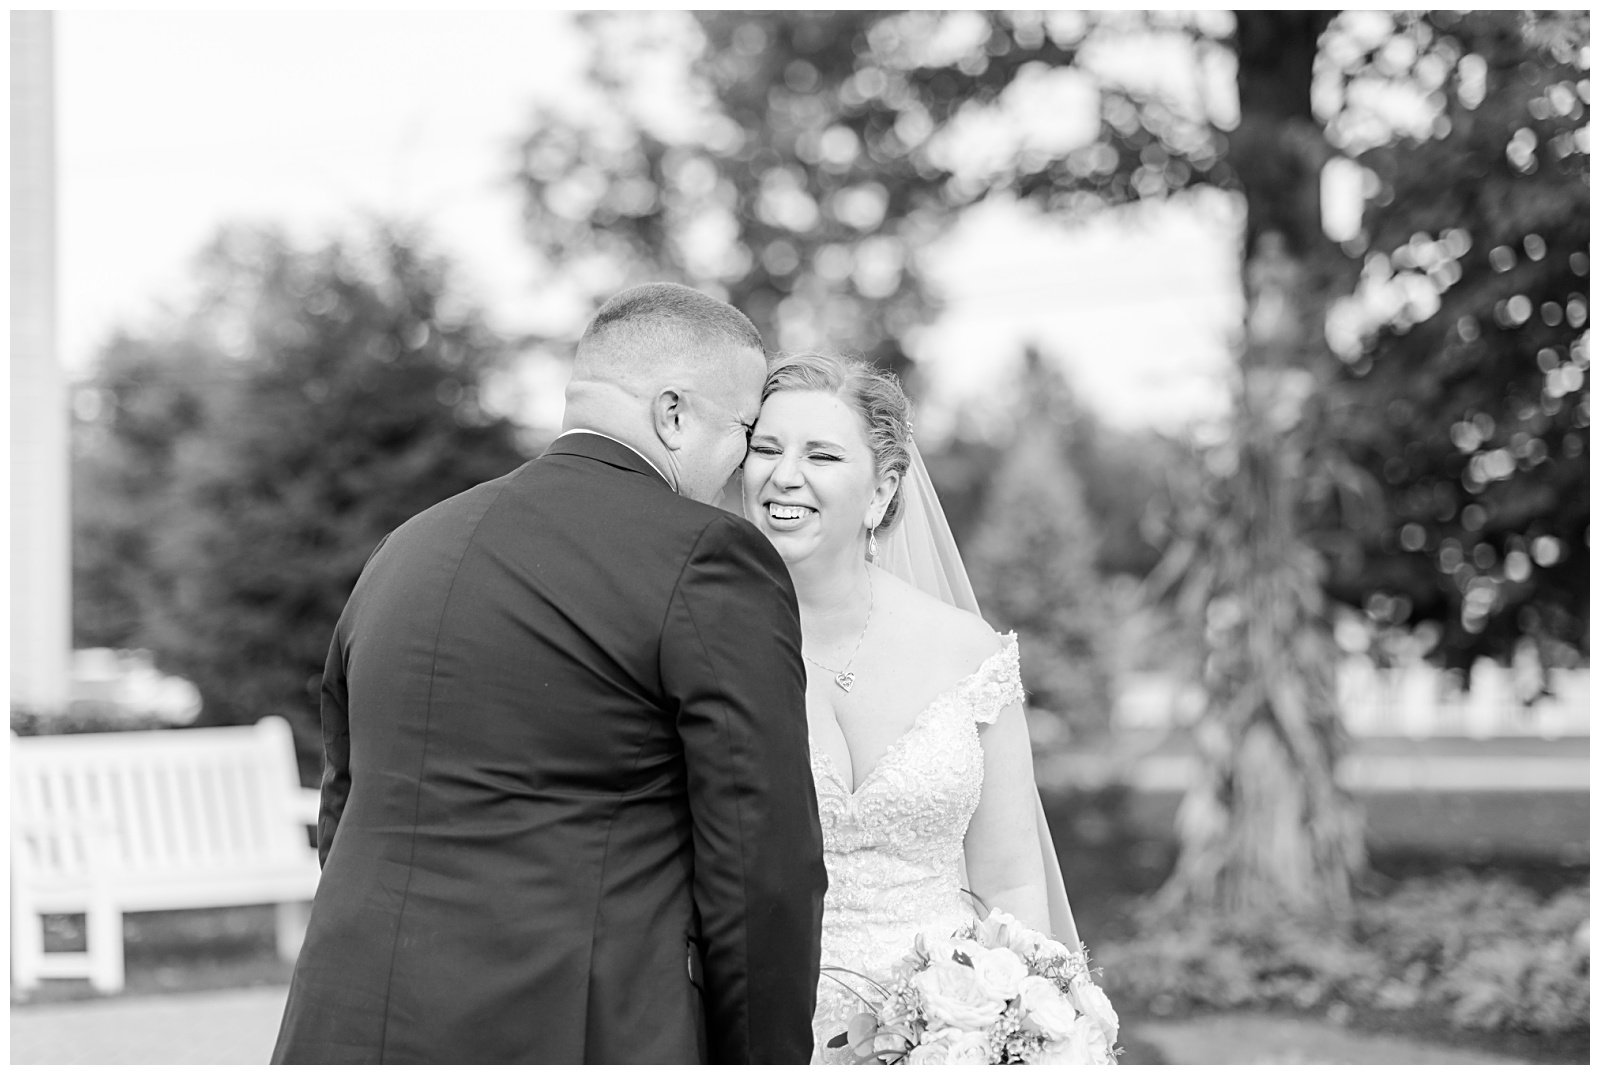 Juli + Chris had their intimate wedding in the fall at The Farm Table in Bernardston MA. Photos by Linda Barry Photography.